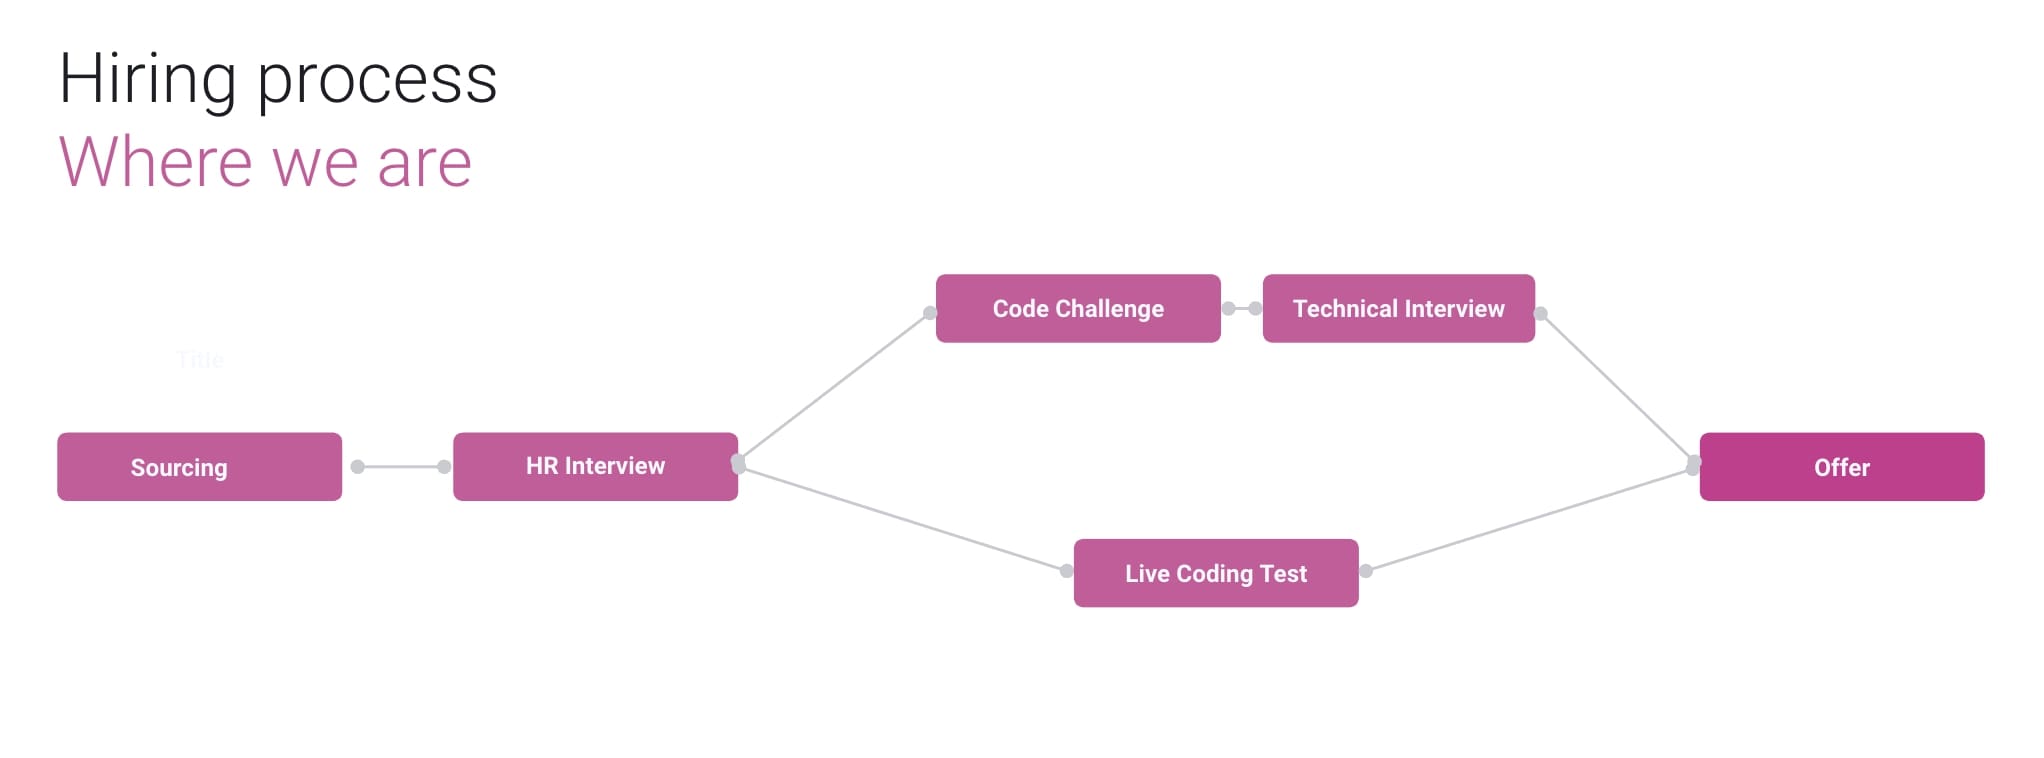 Live coding test in a hiring process